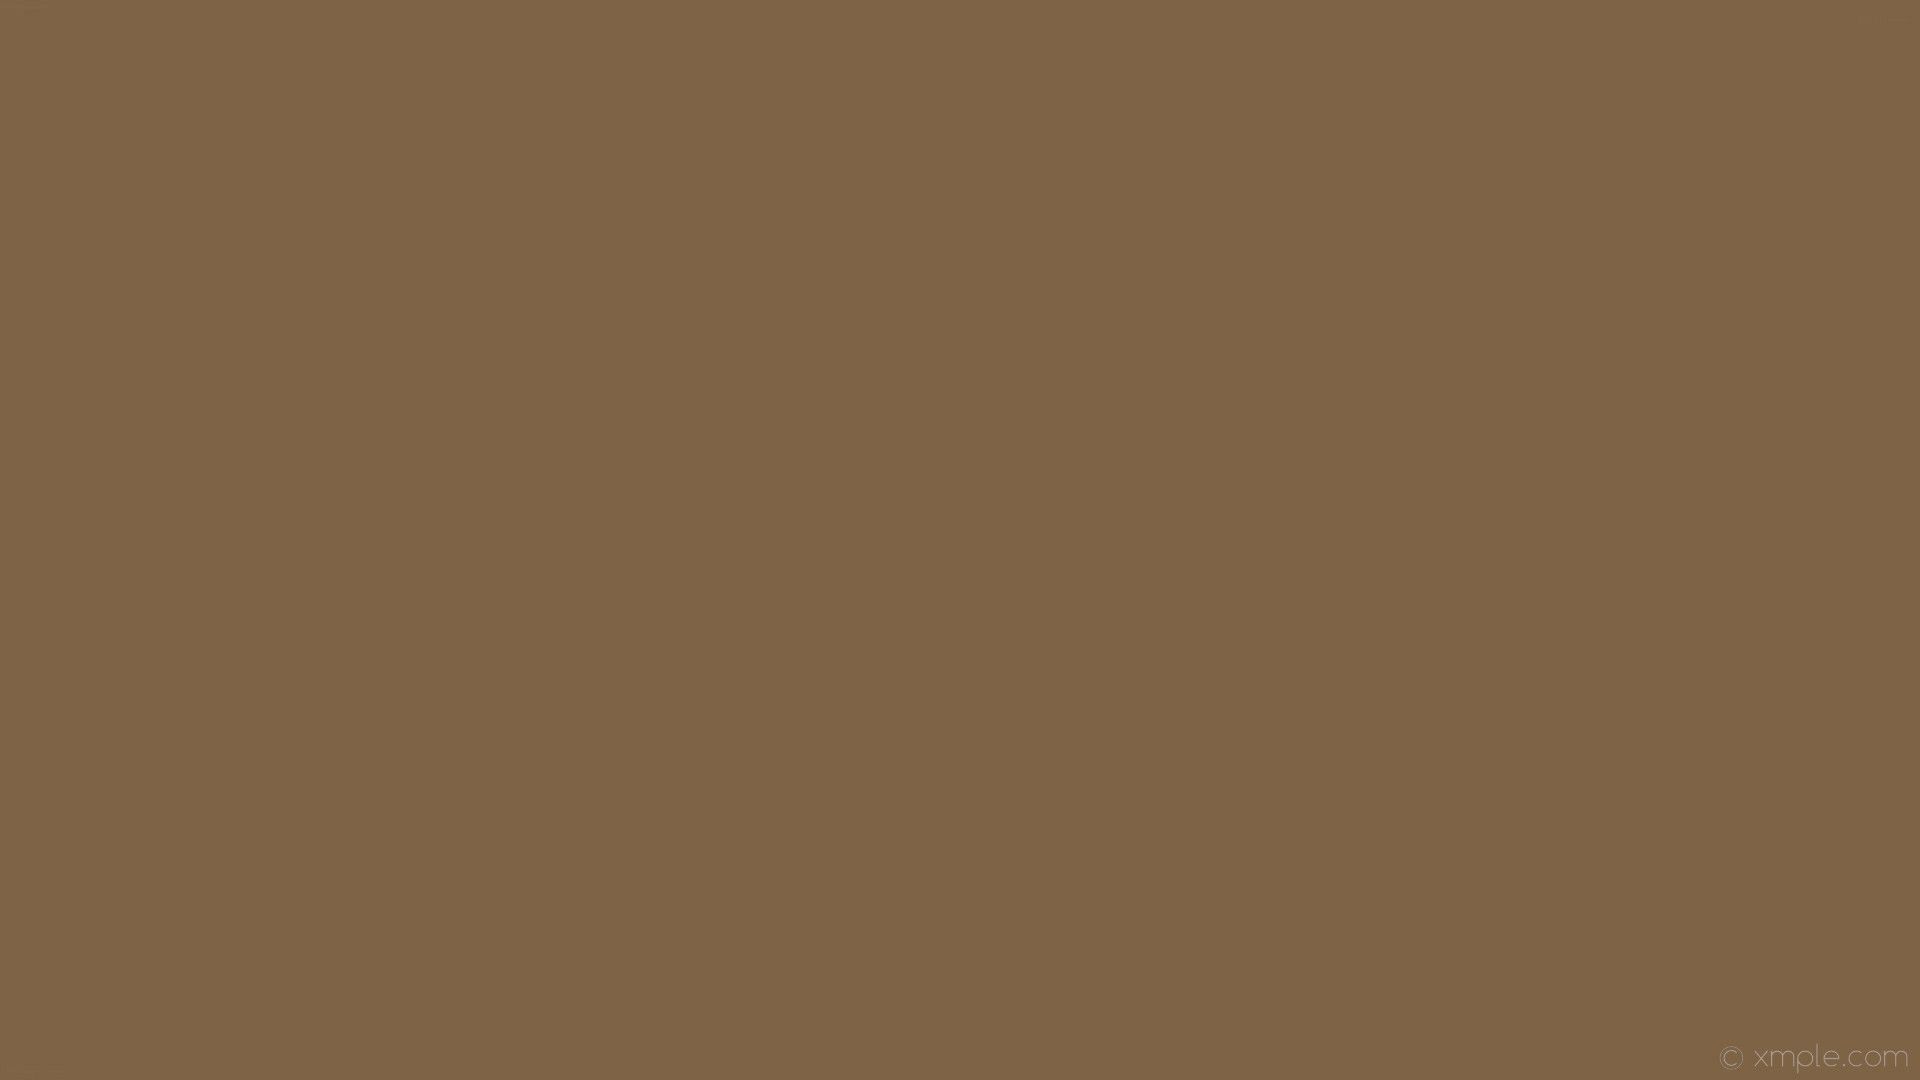 A brown color with no texture - Brown